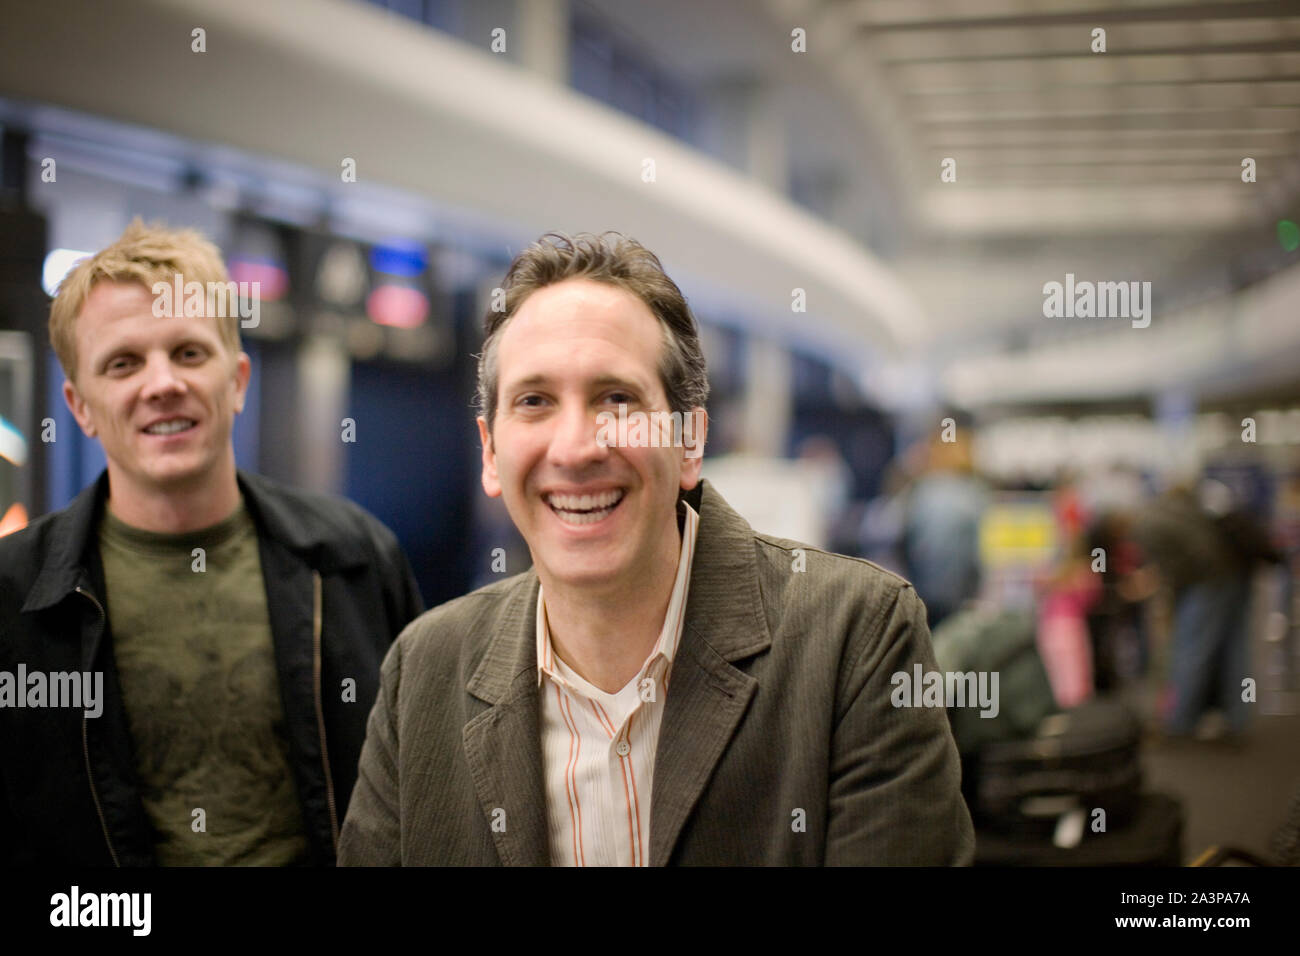 Portrait of two smiling mid-adult men inside an airport. Stock Photo